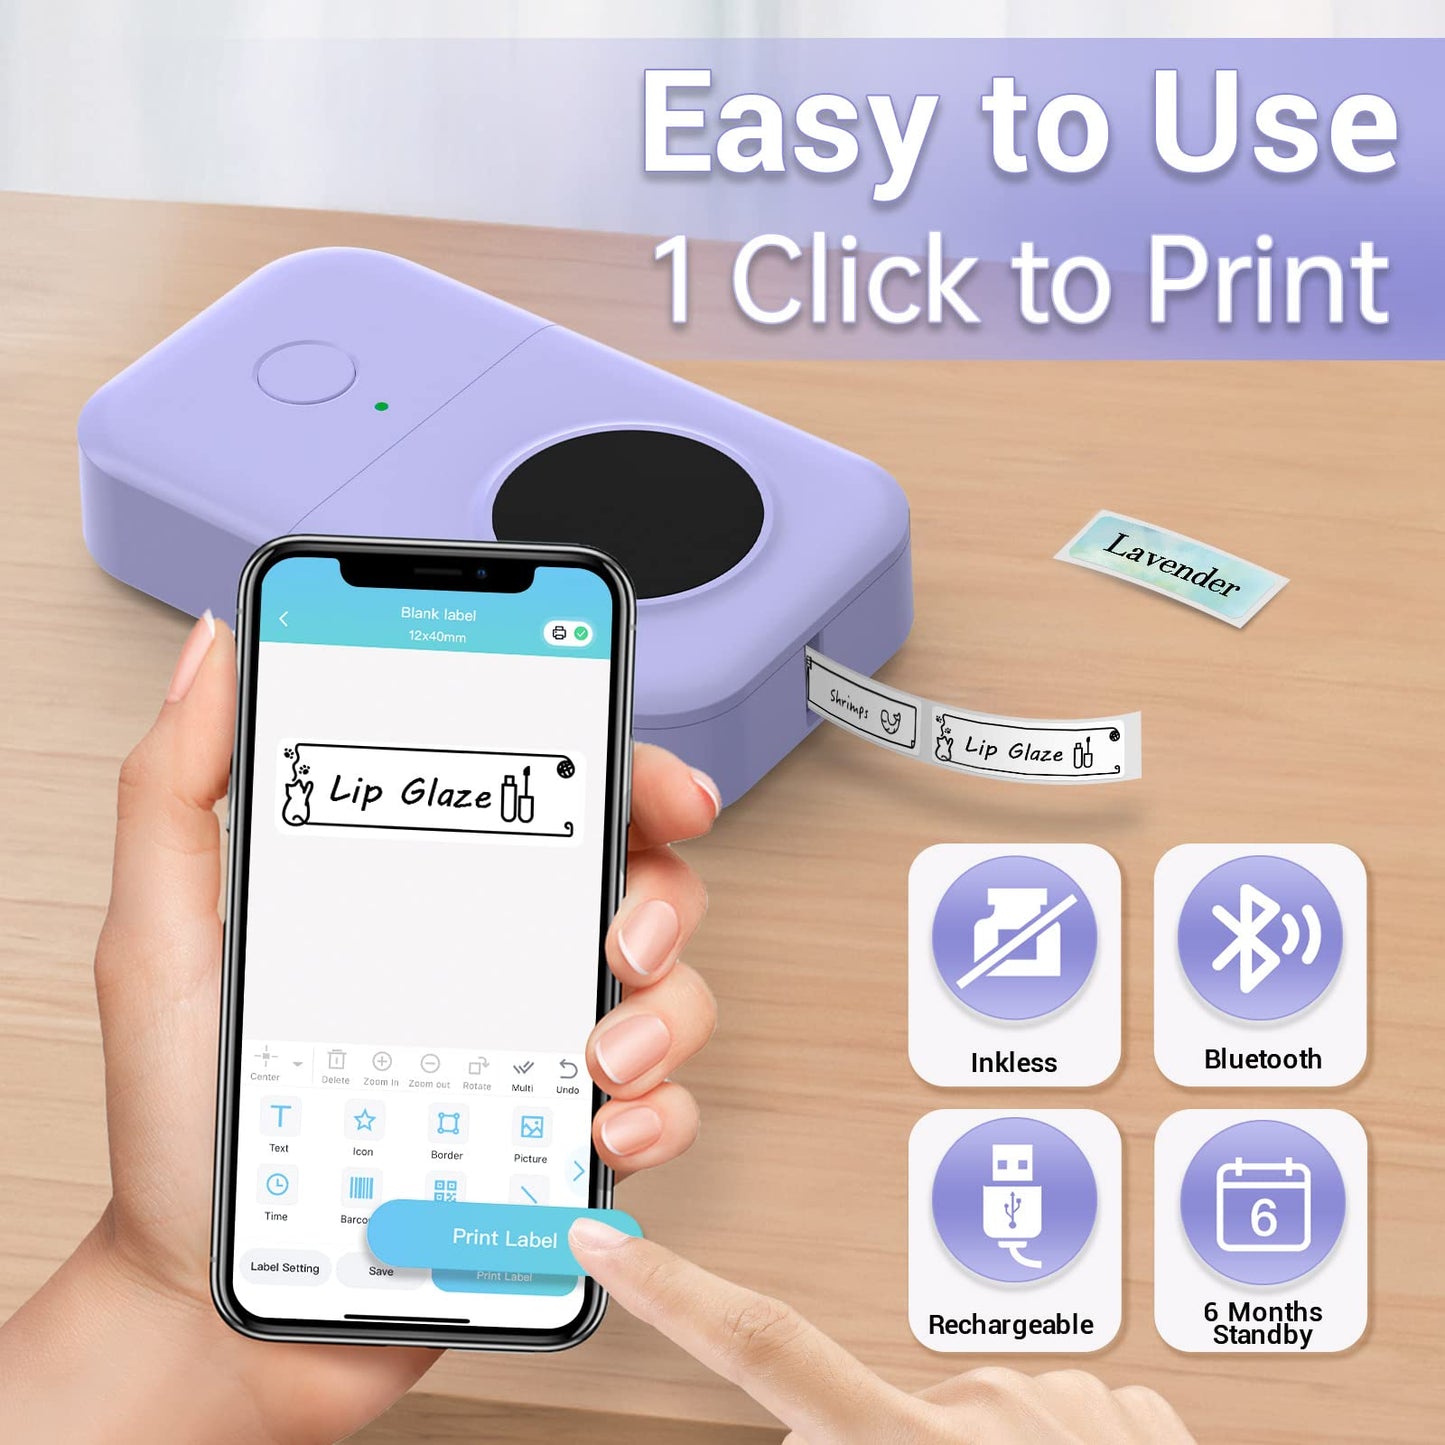 Label Makers - D30 Mini Bluetooth Label Maker Machine, Thermal Wireless Portable Label Printer, Small Sticker Printer Maker Machine for iOS & Android, Christmas Birthday Gift, Purple